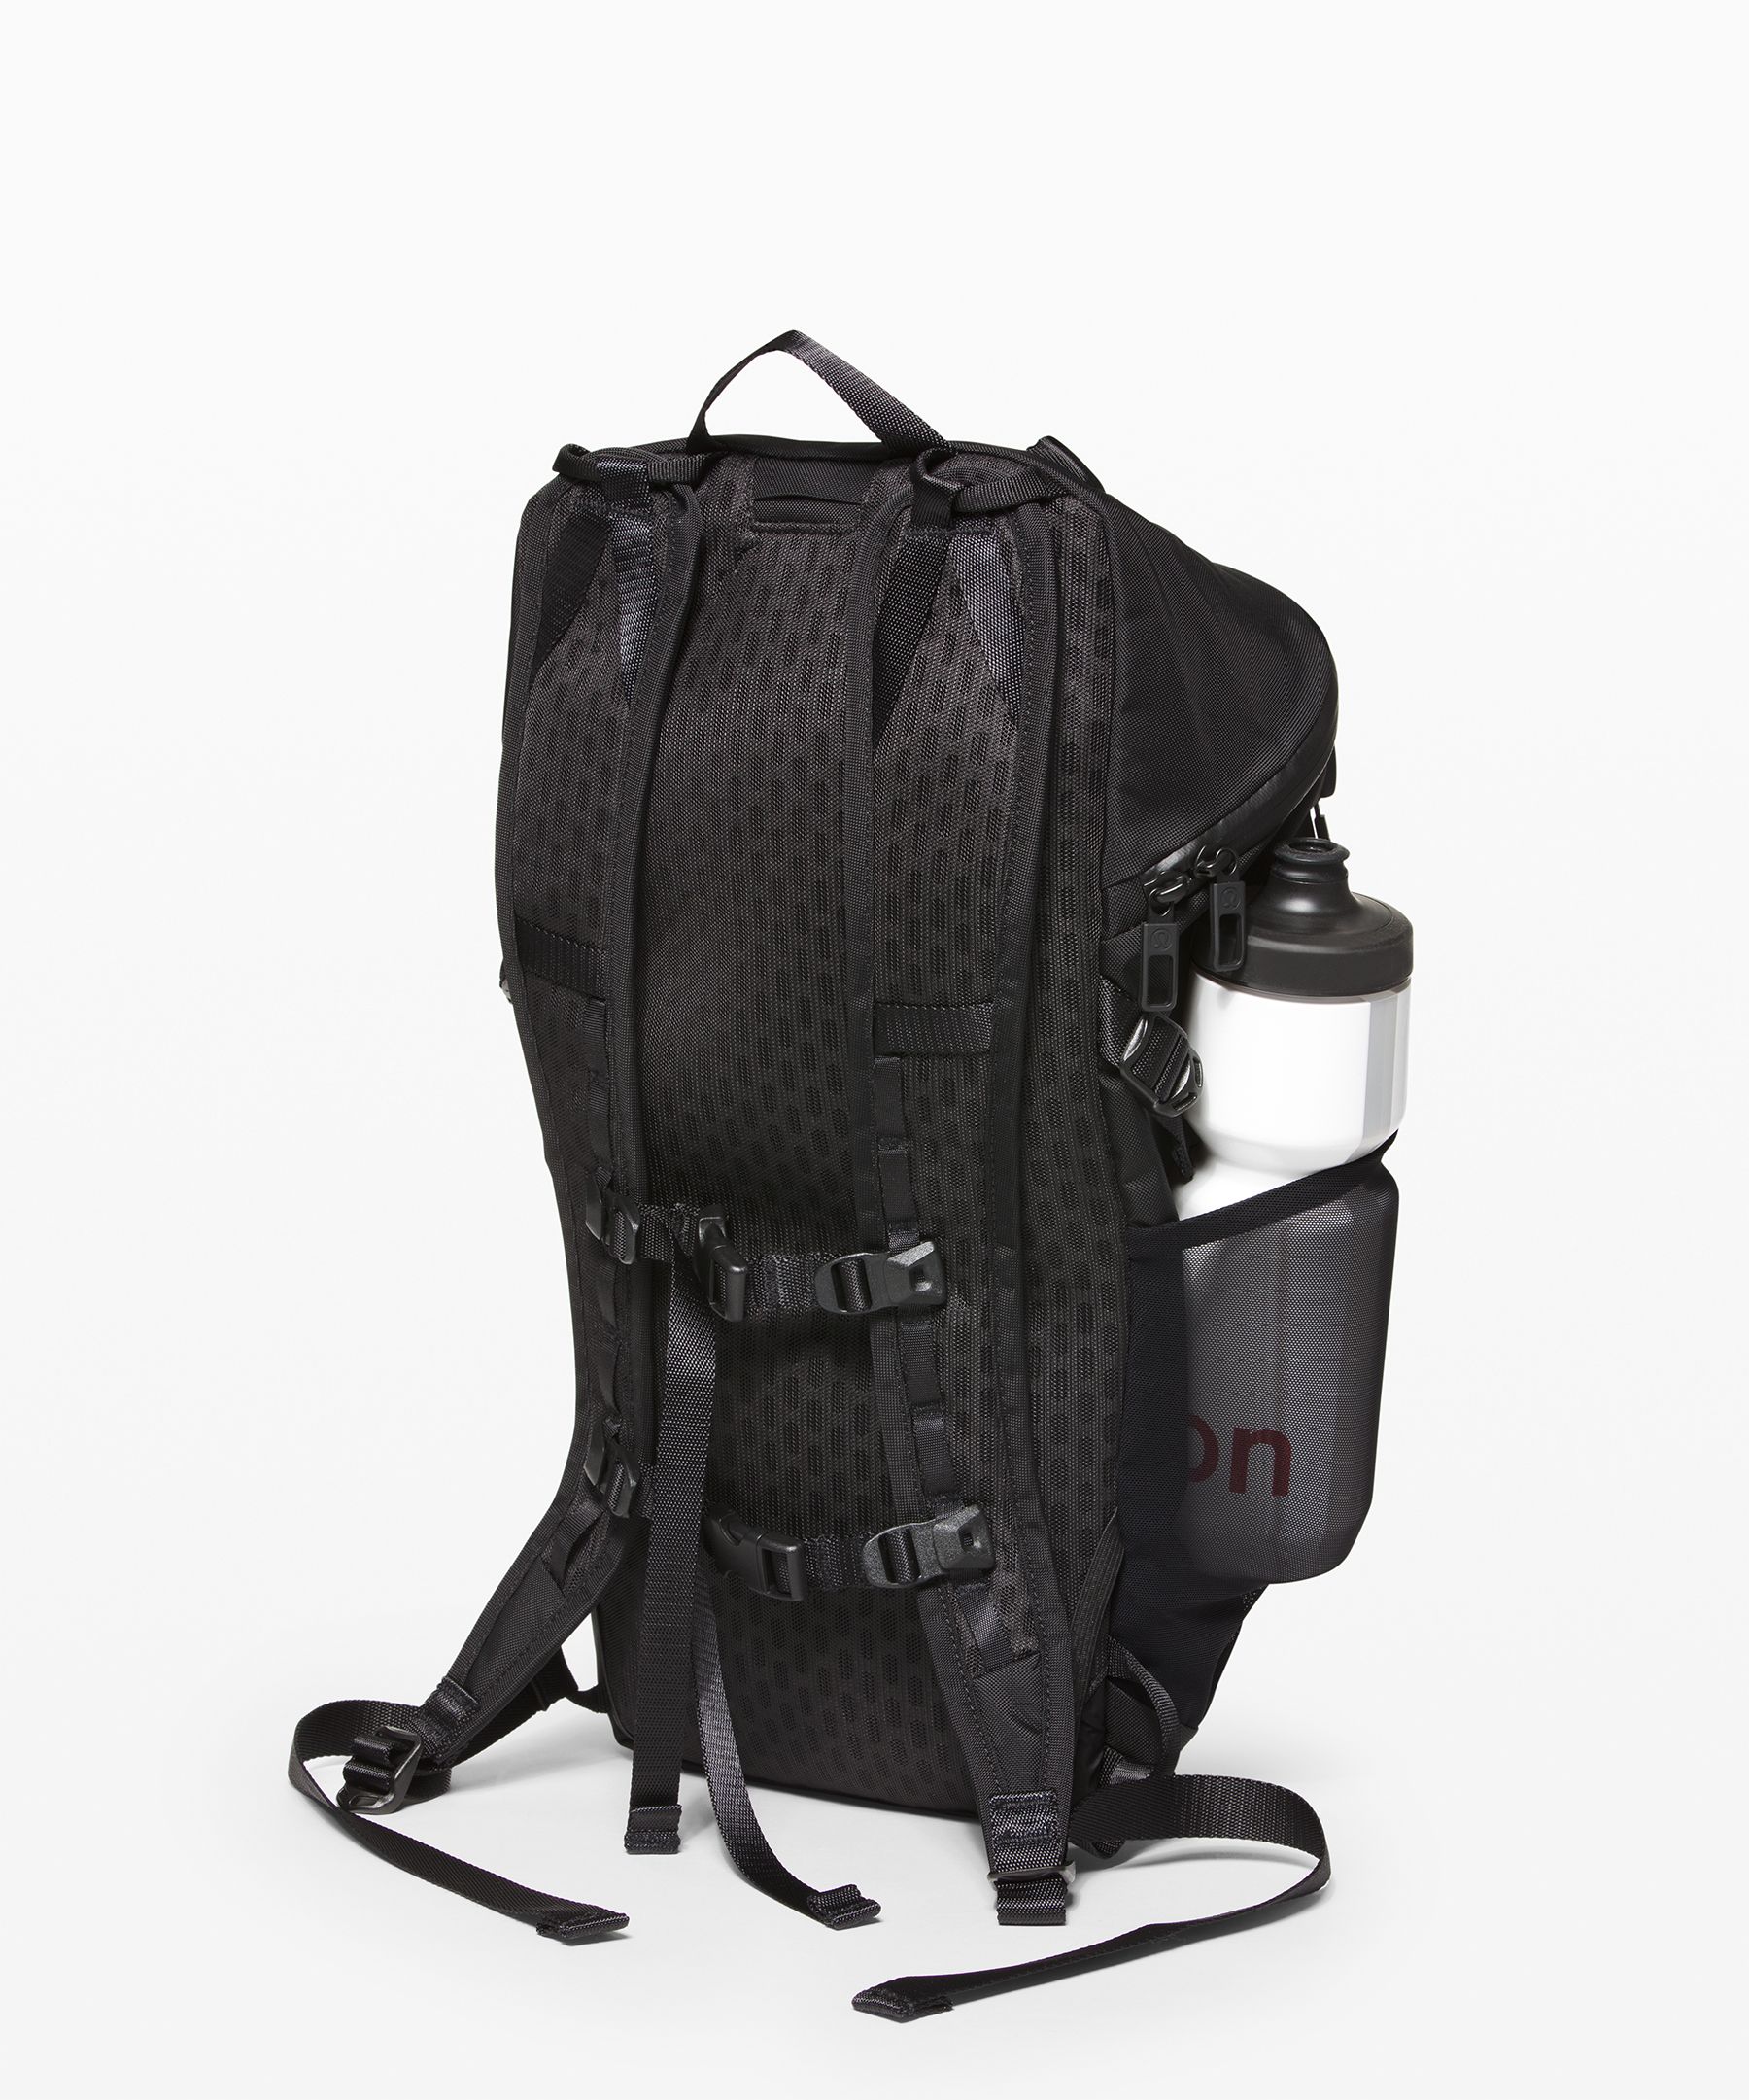 lululemon more miles backpack review